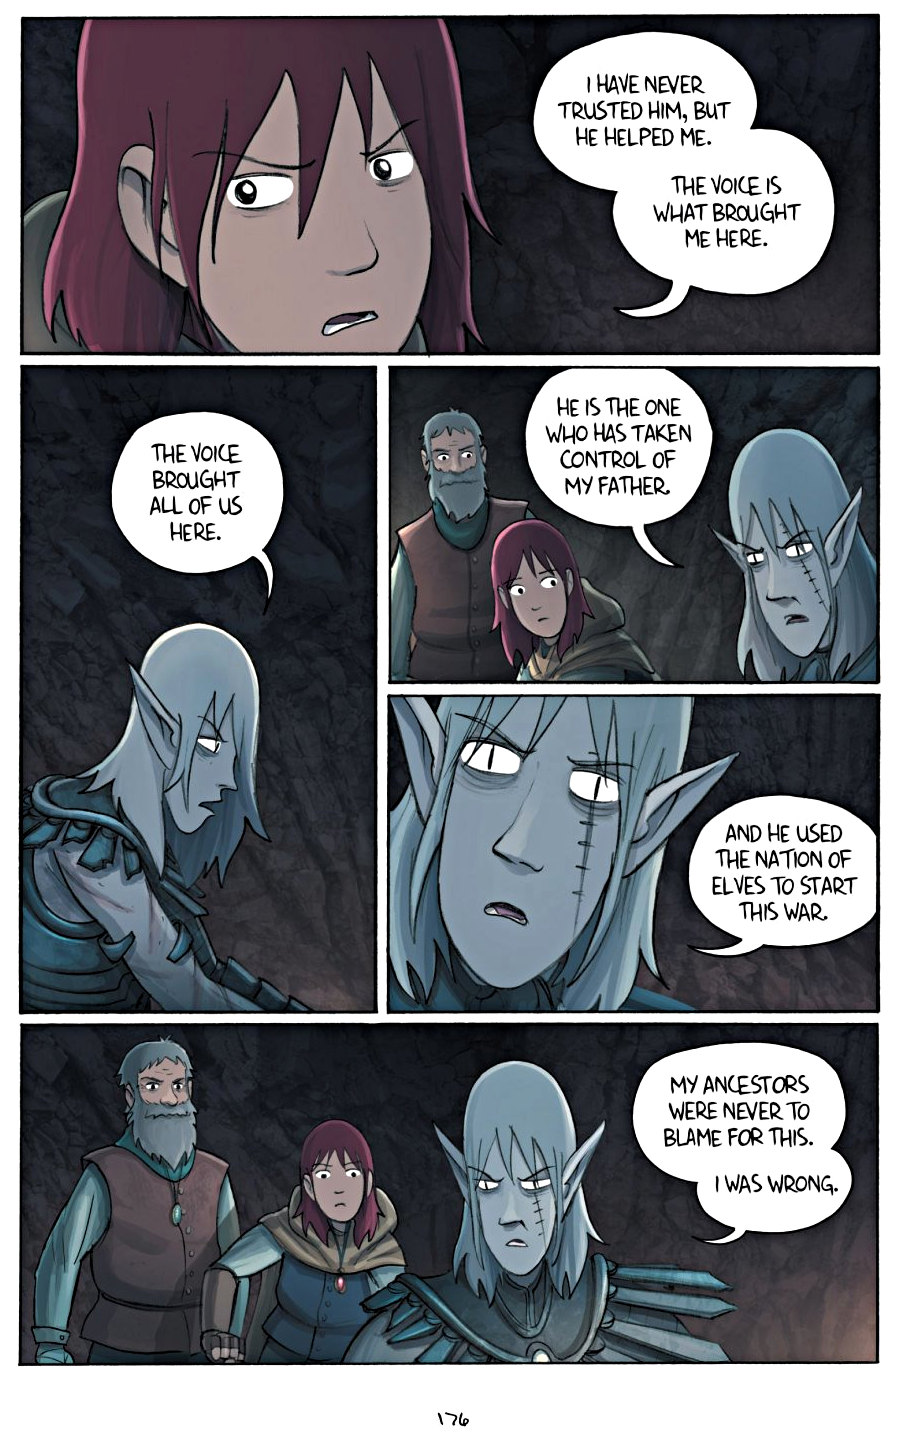 page 176 of amulet 5 prince of the elves graphic novel